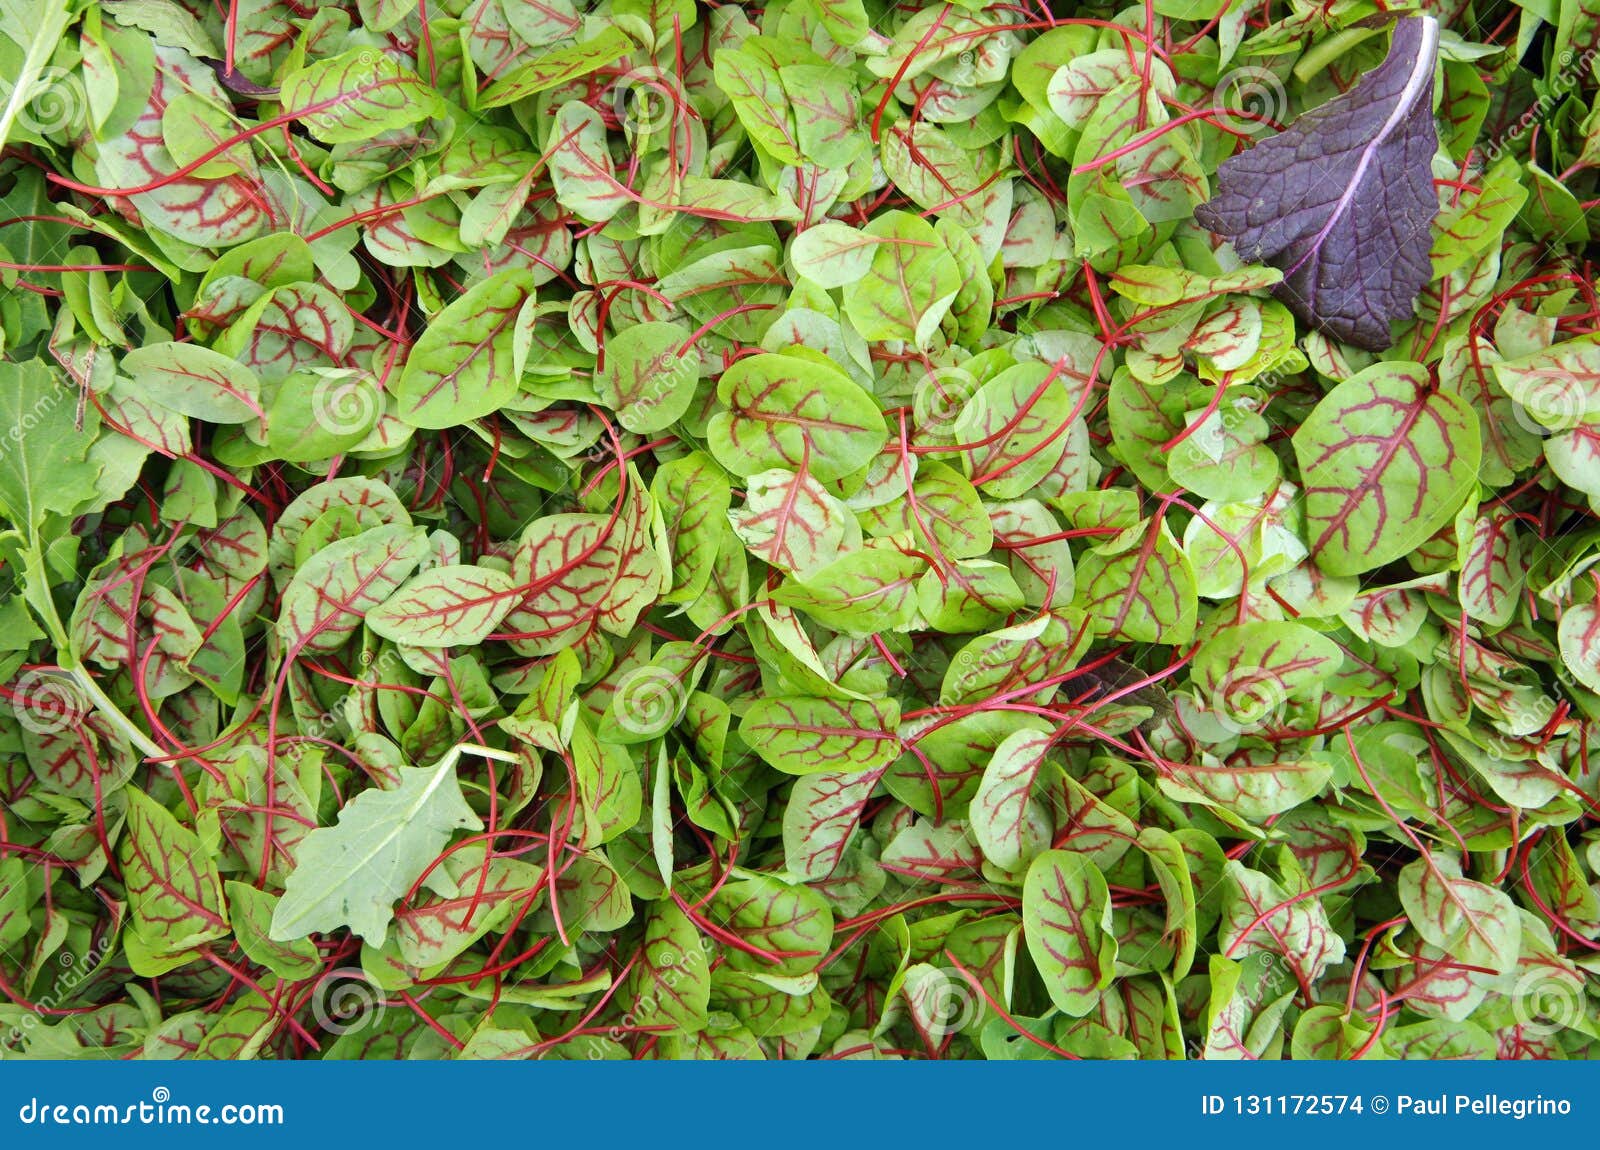 sorrel red veined salad greens view from above